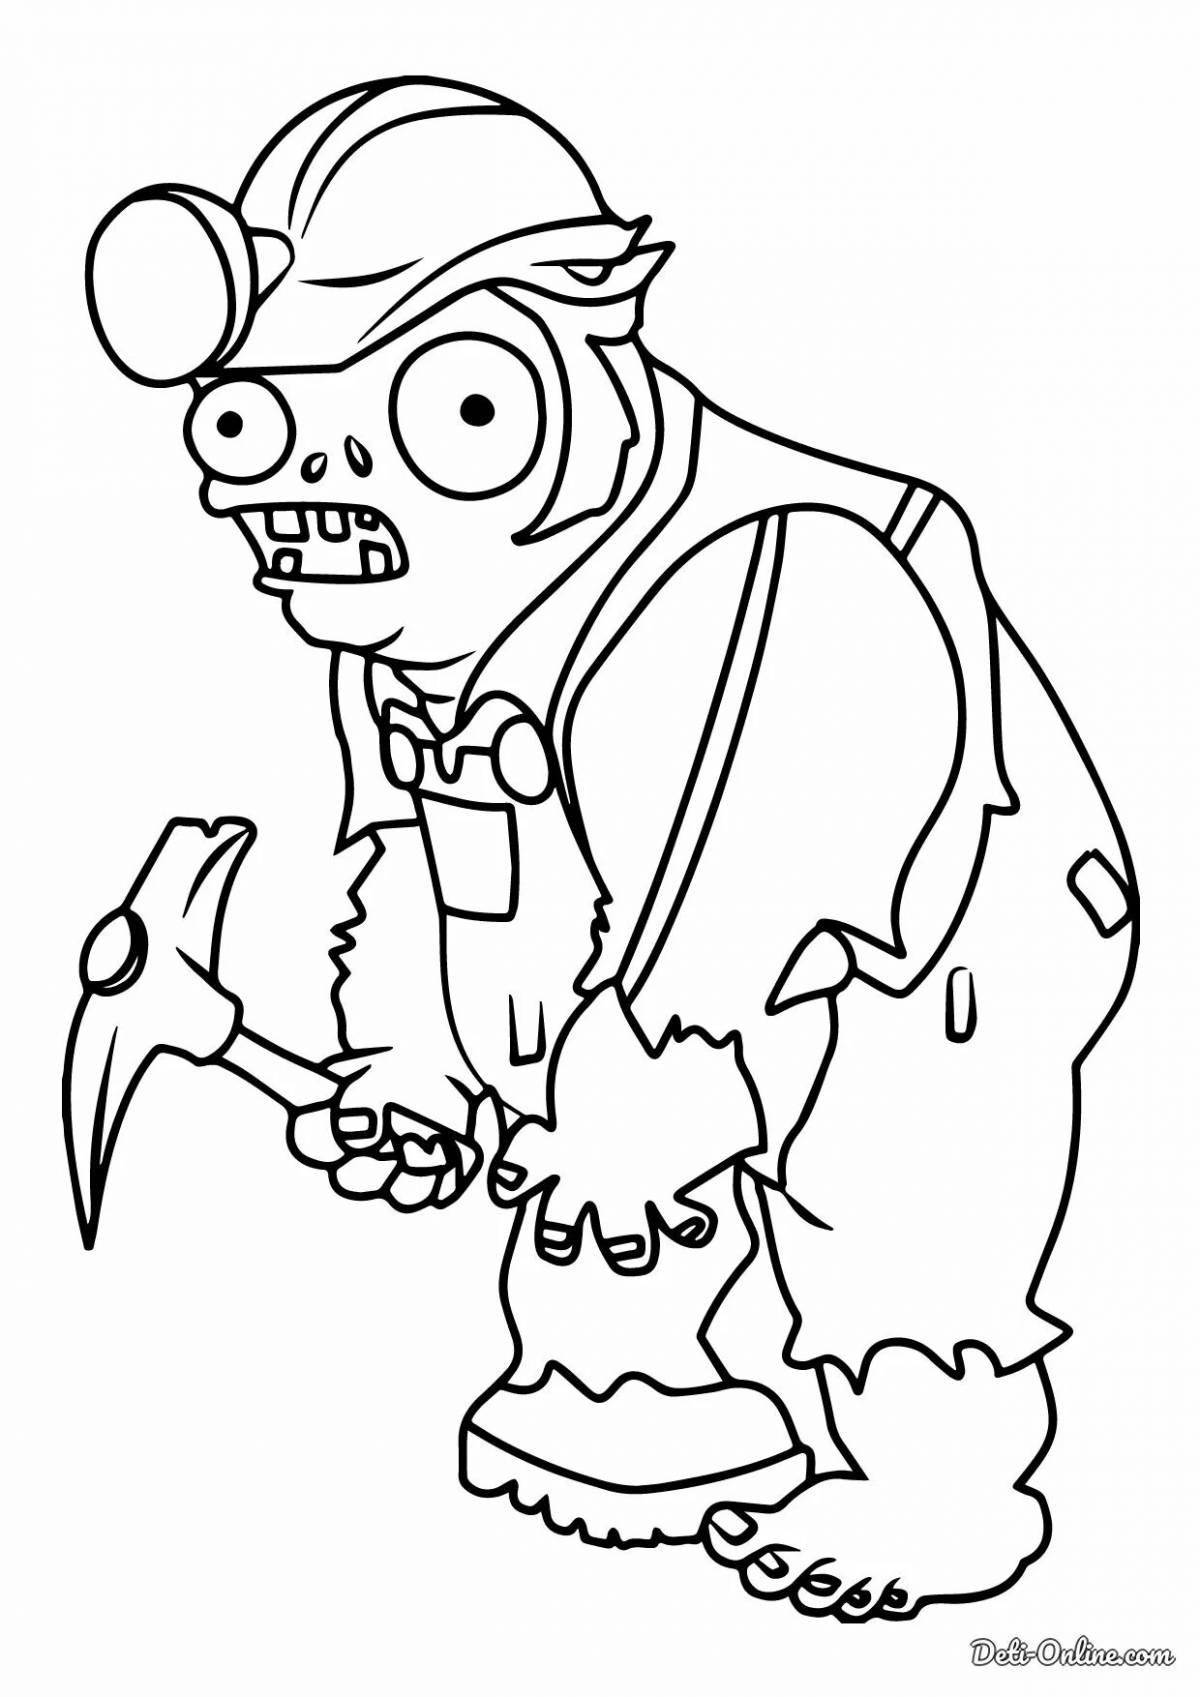 Coloring book terrible zombie planet